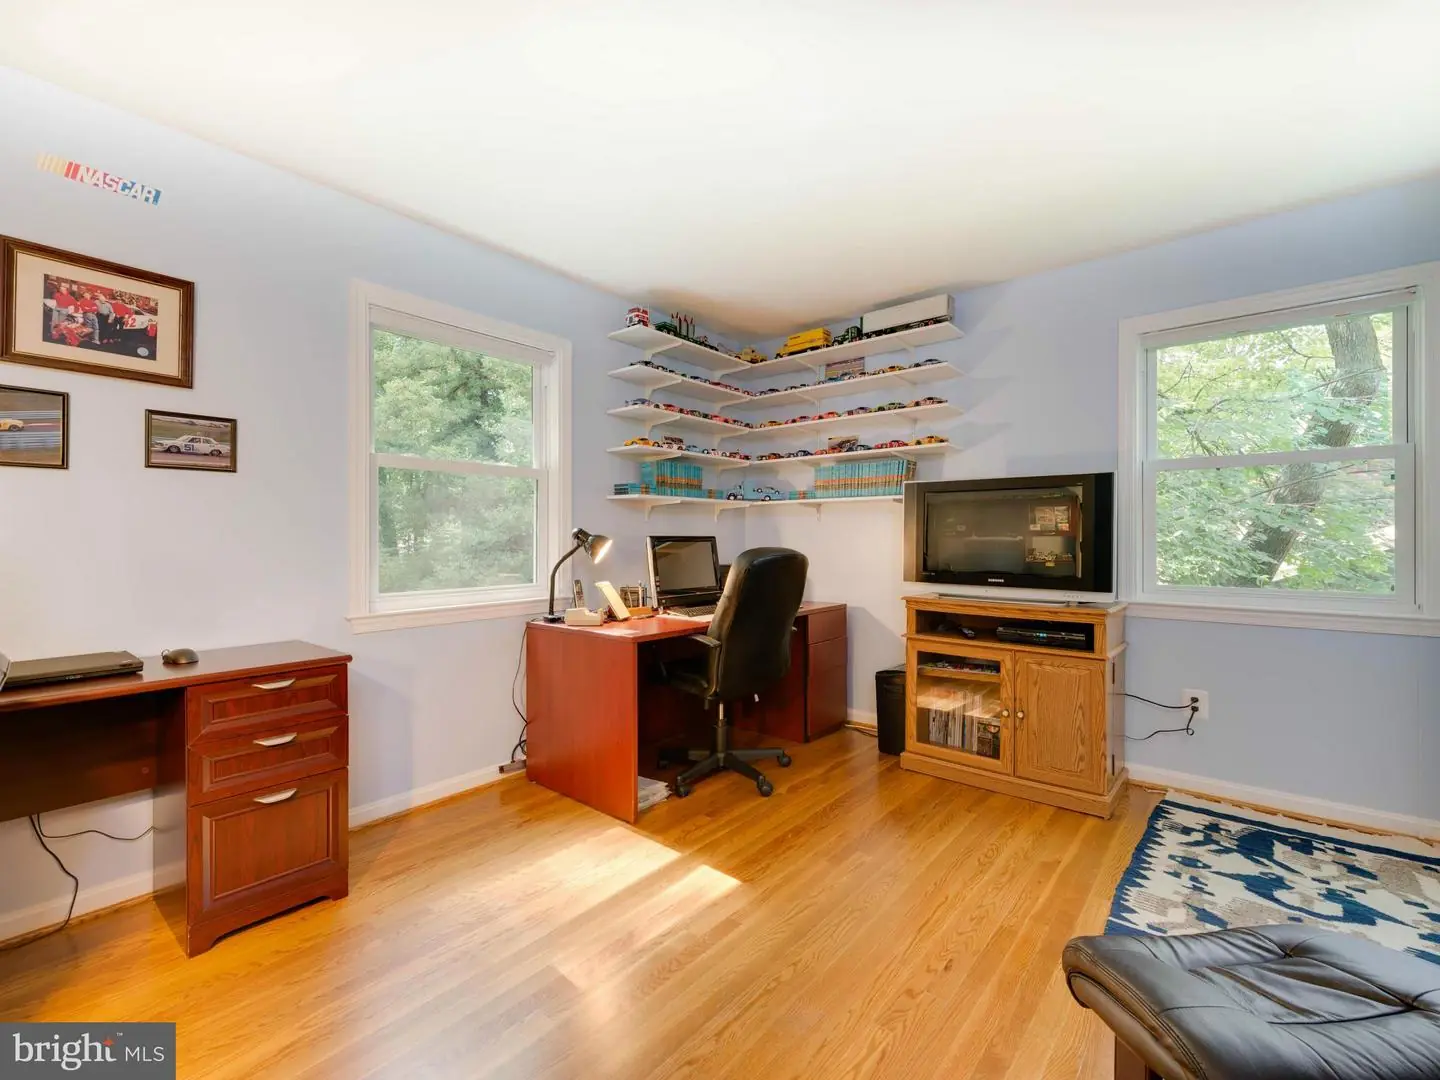 1003712923-300761235955-2021-09-07-04-59-51  |   | Falls Church Delaware Real Estate For Sale | MLS# 1003712923  - Best of Northern Virginia